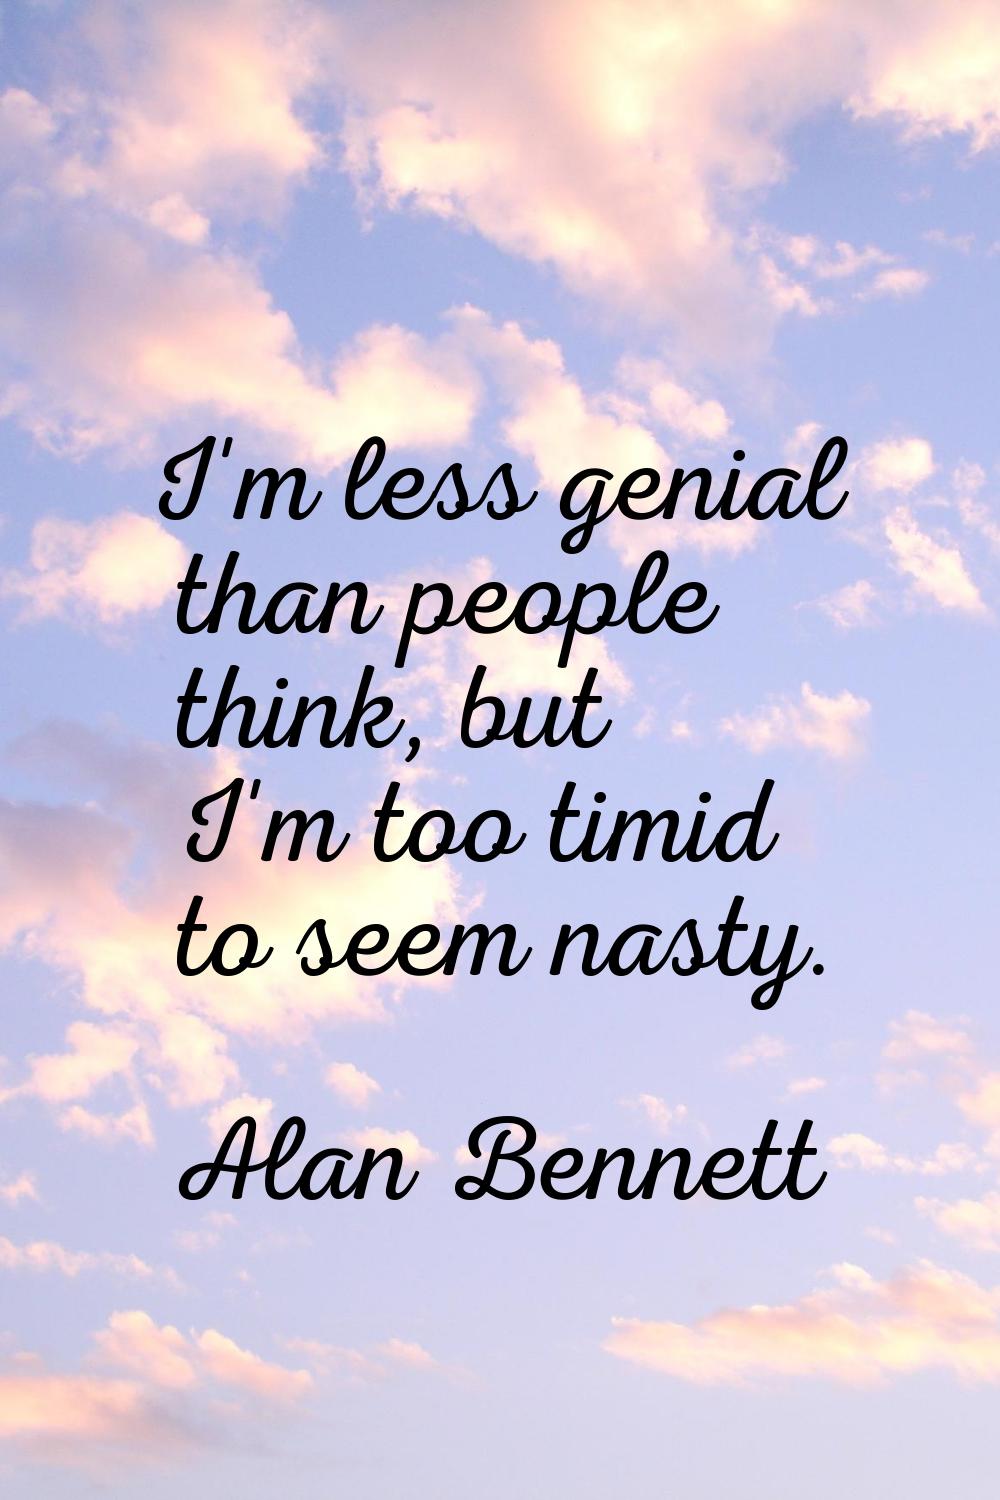 I'm less genial than people think, but I'm too timid to seem nasty.